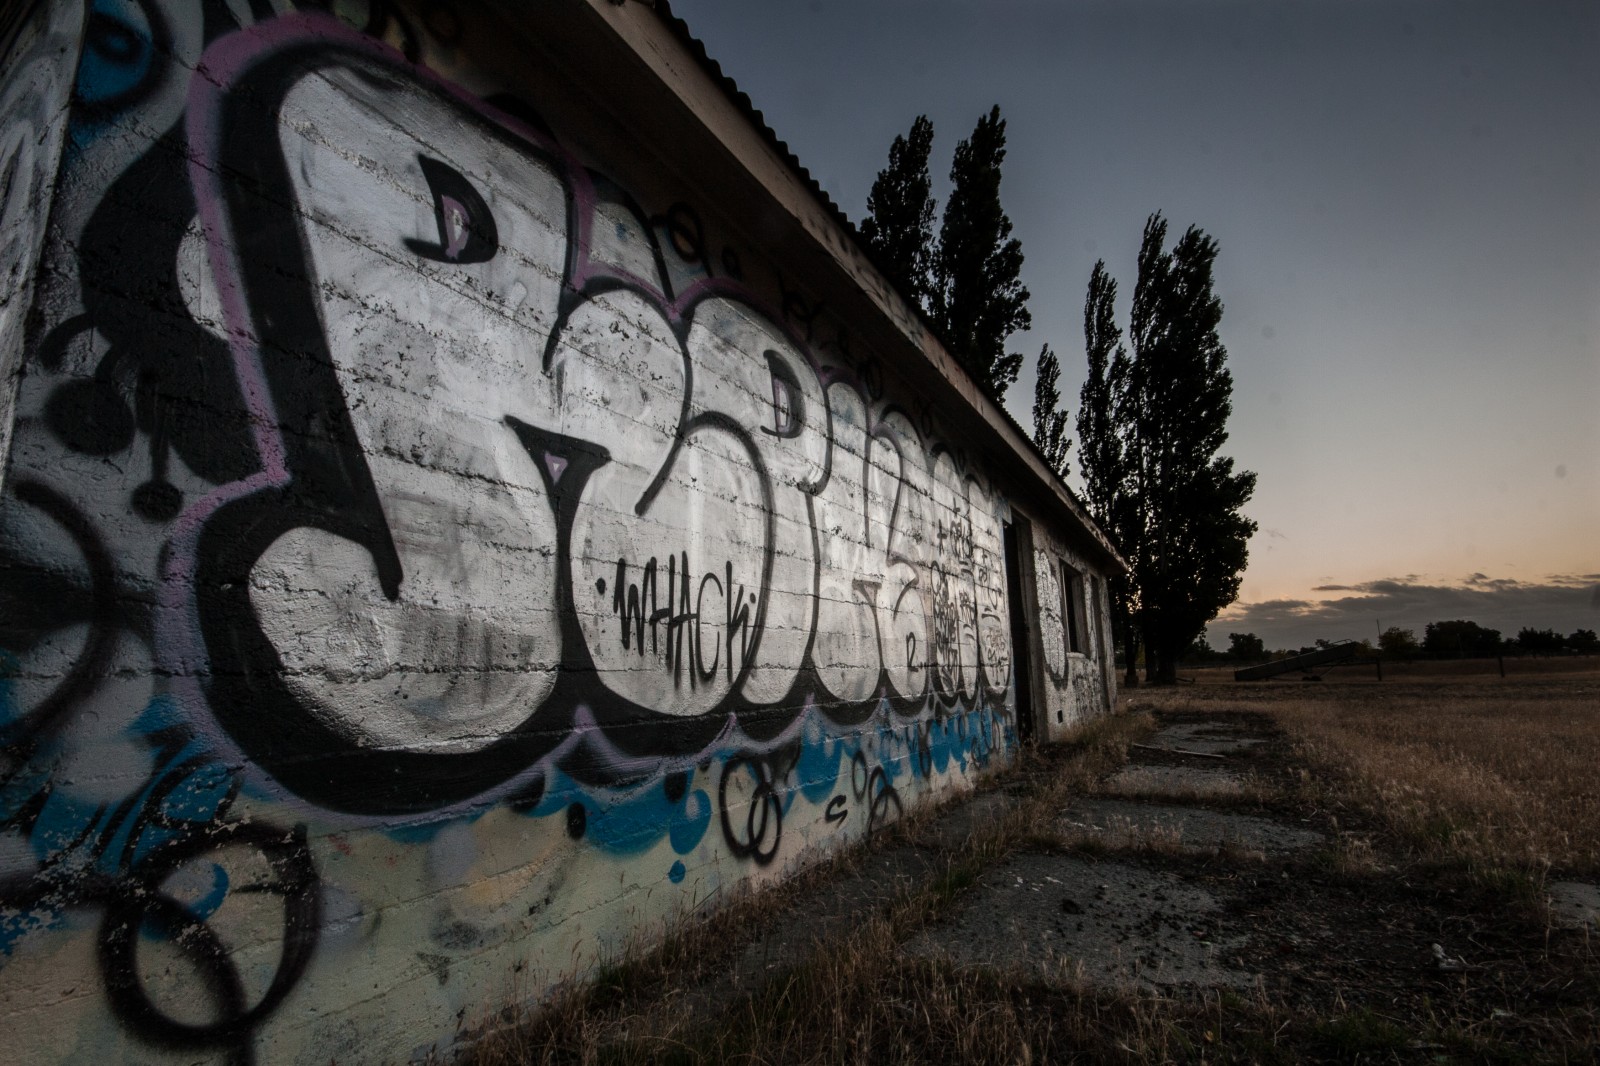 graffiti covered building at sunset